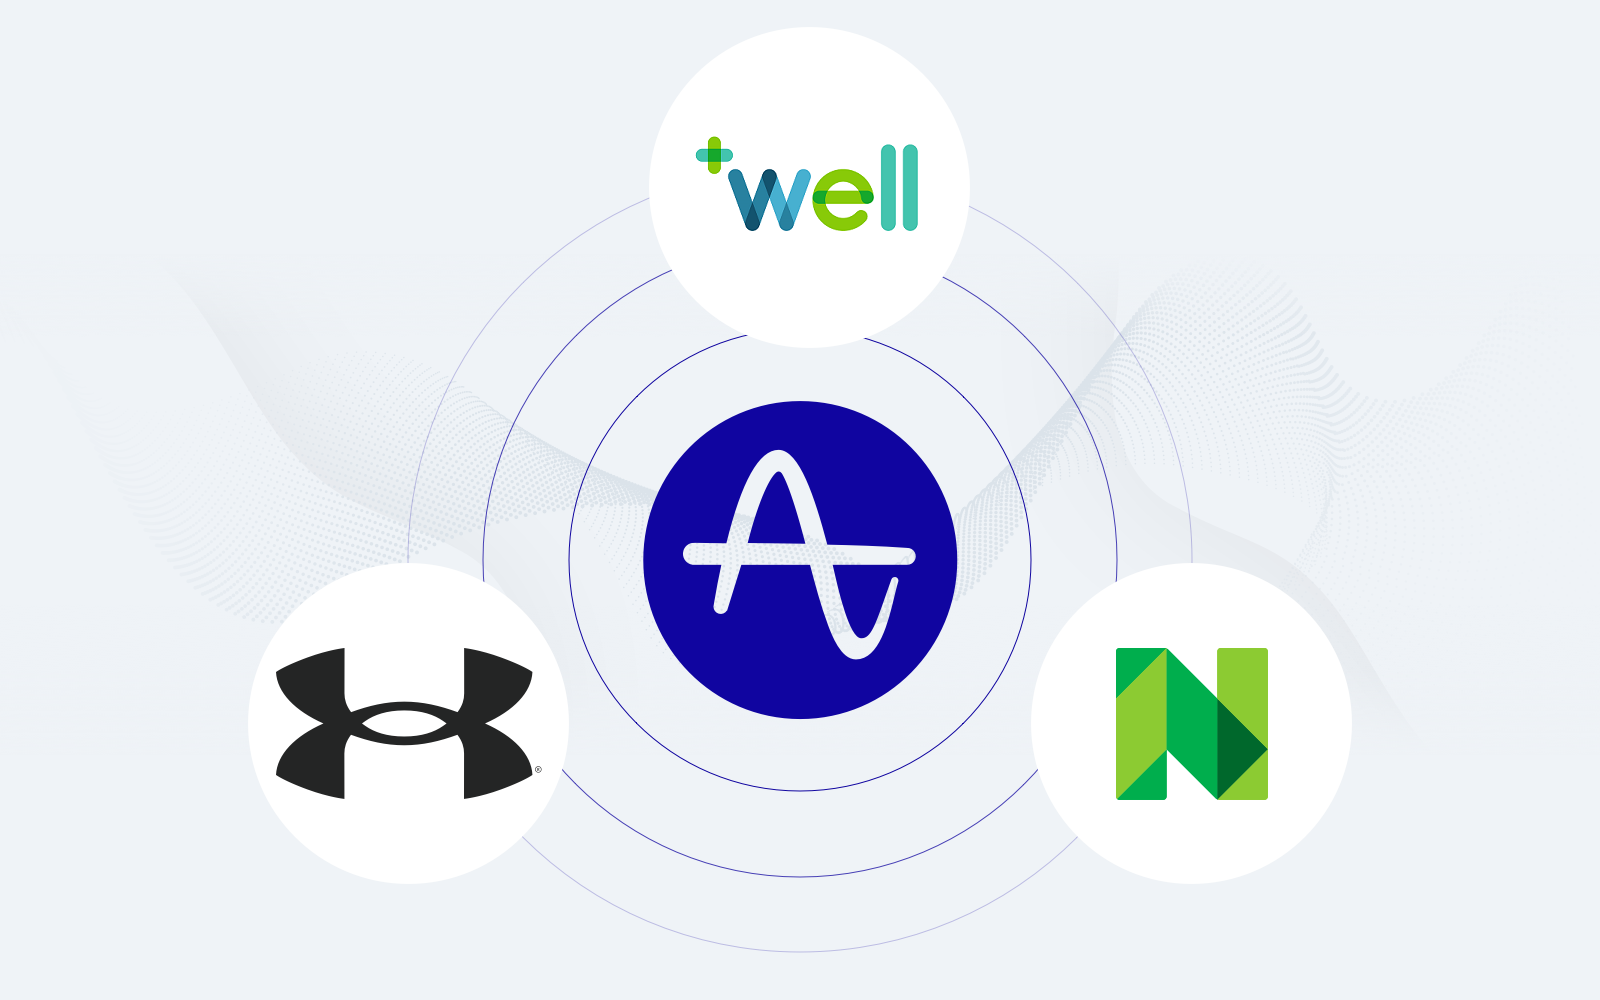 How Product Intelligence Helped Under Armour, Well Pharmacy, and NerdWallet Iterate Faster